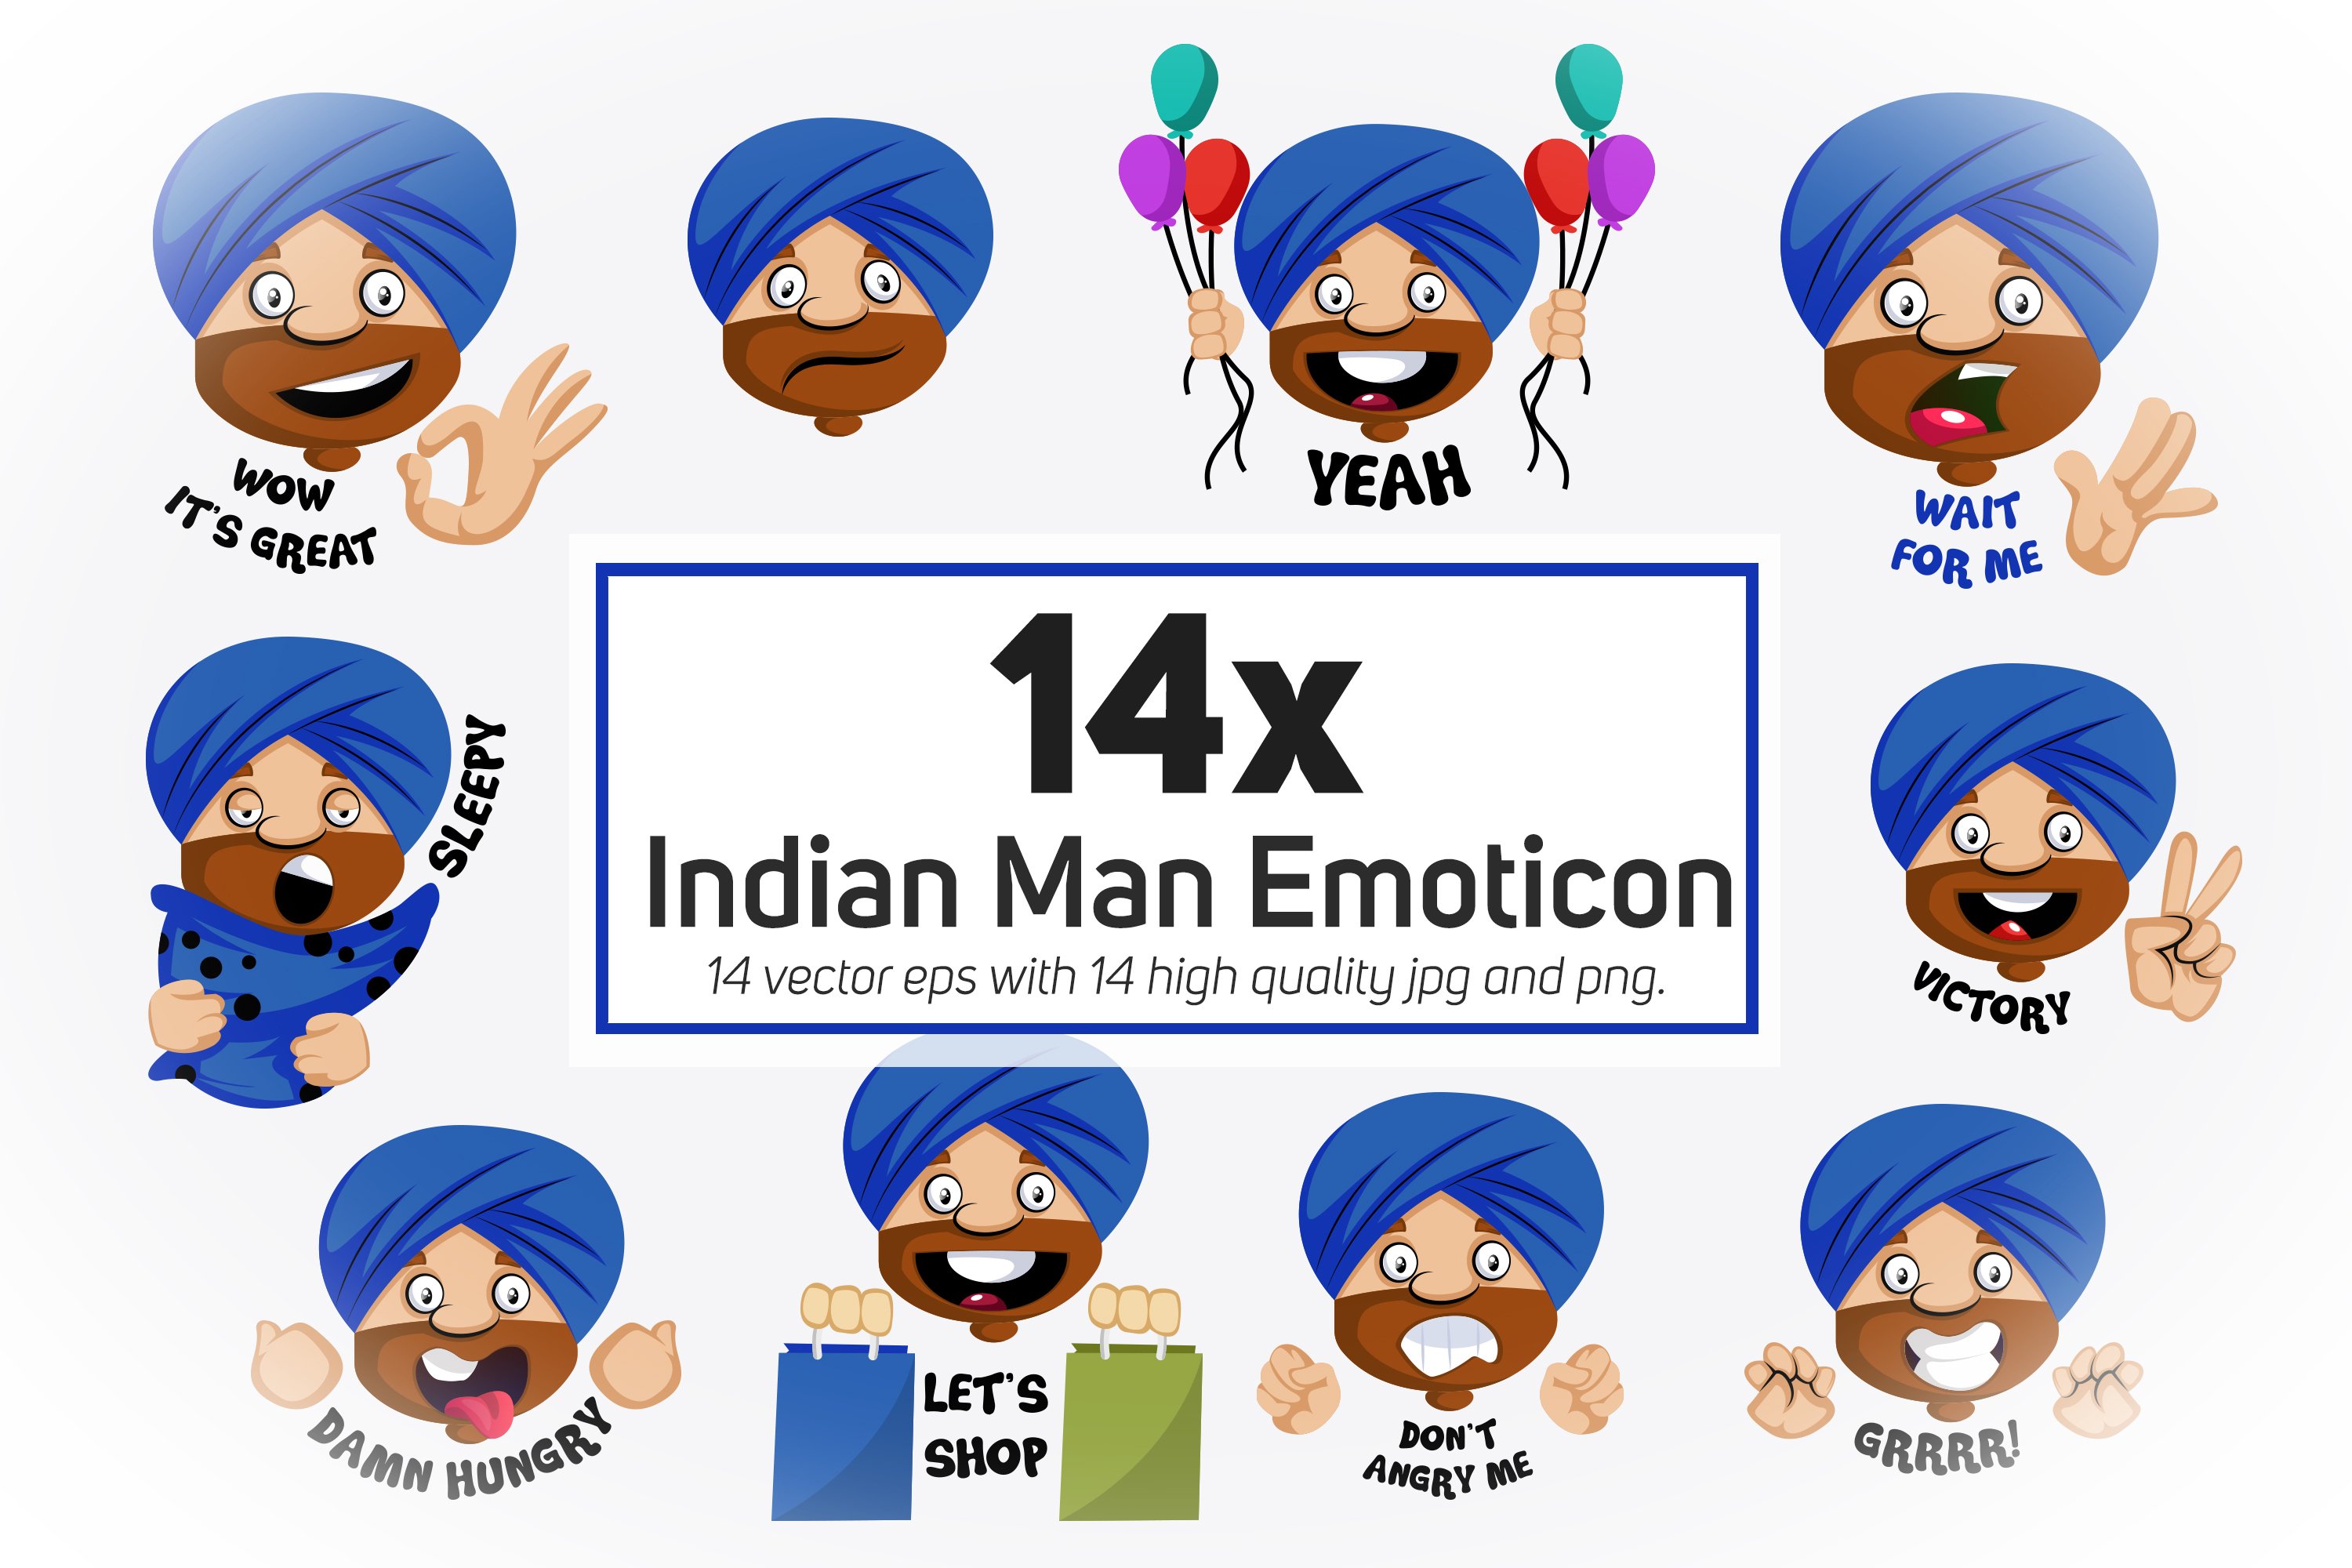 Bundle of funny images of indian man emoticon.